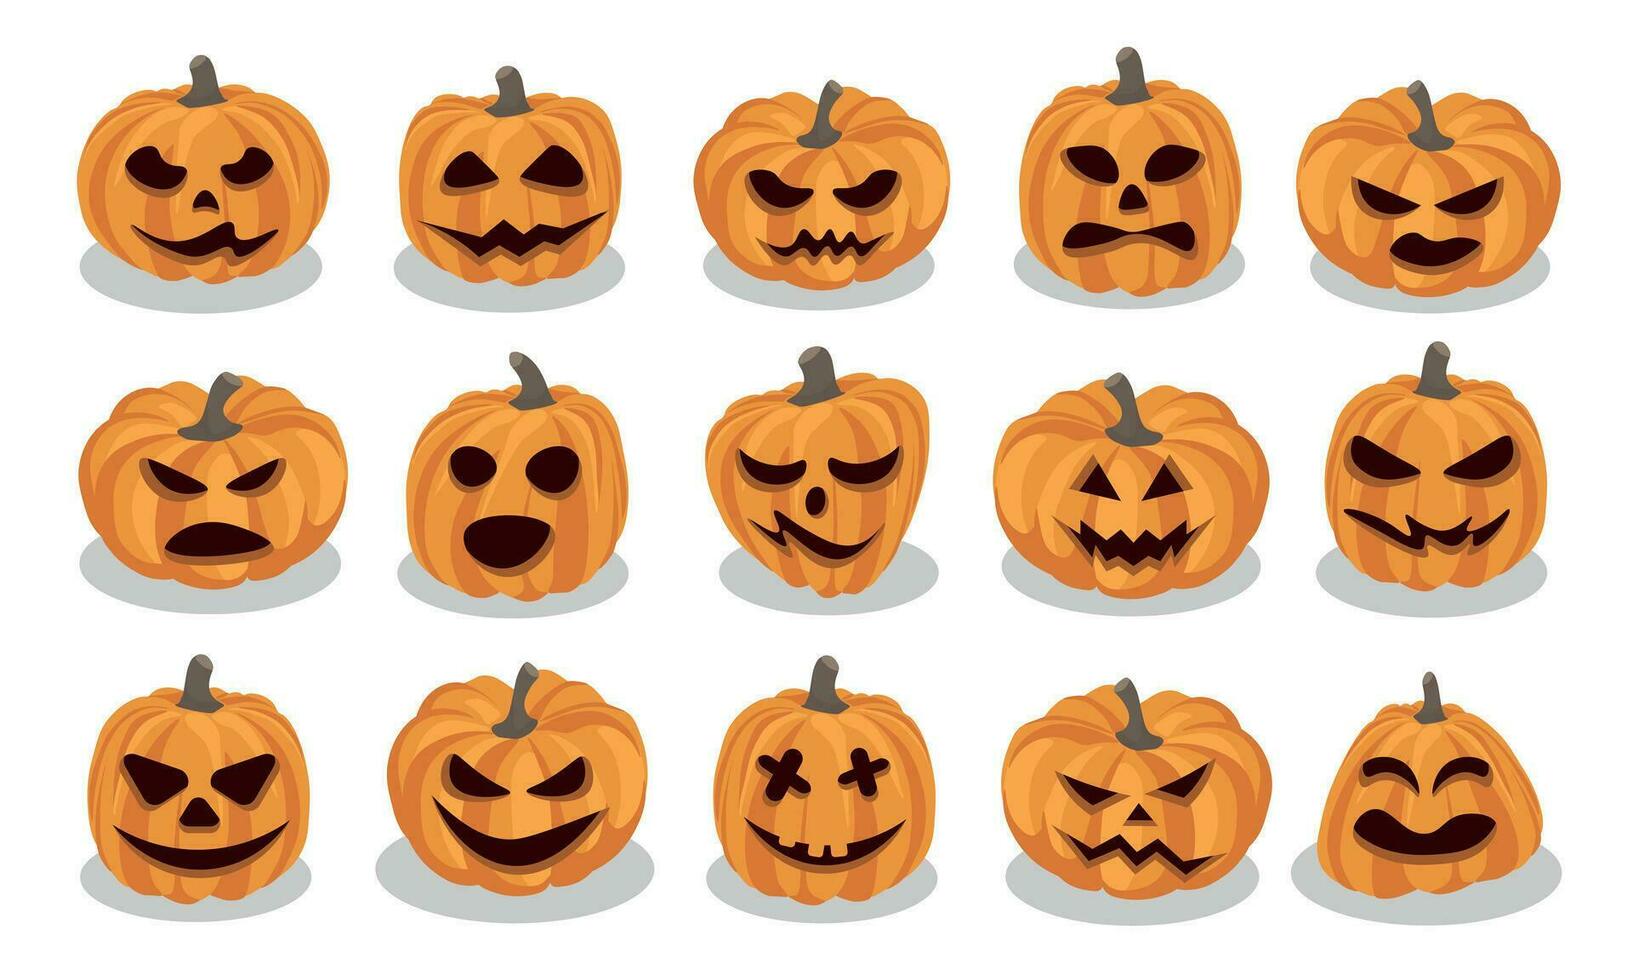 Set of orange pumpkins with different smiles for Halloween day isolated on white background. The main symbol of the Halloween celebration. Vector illustration.